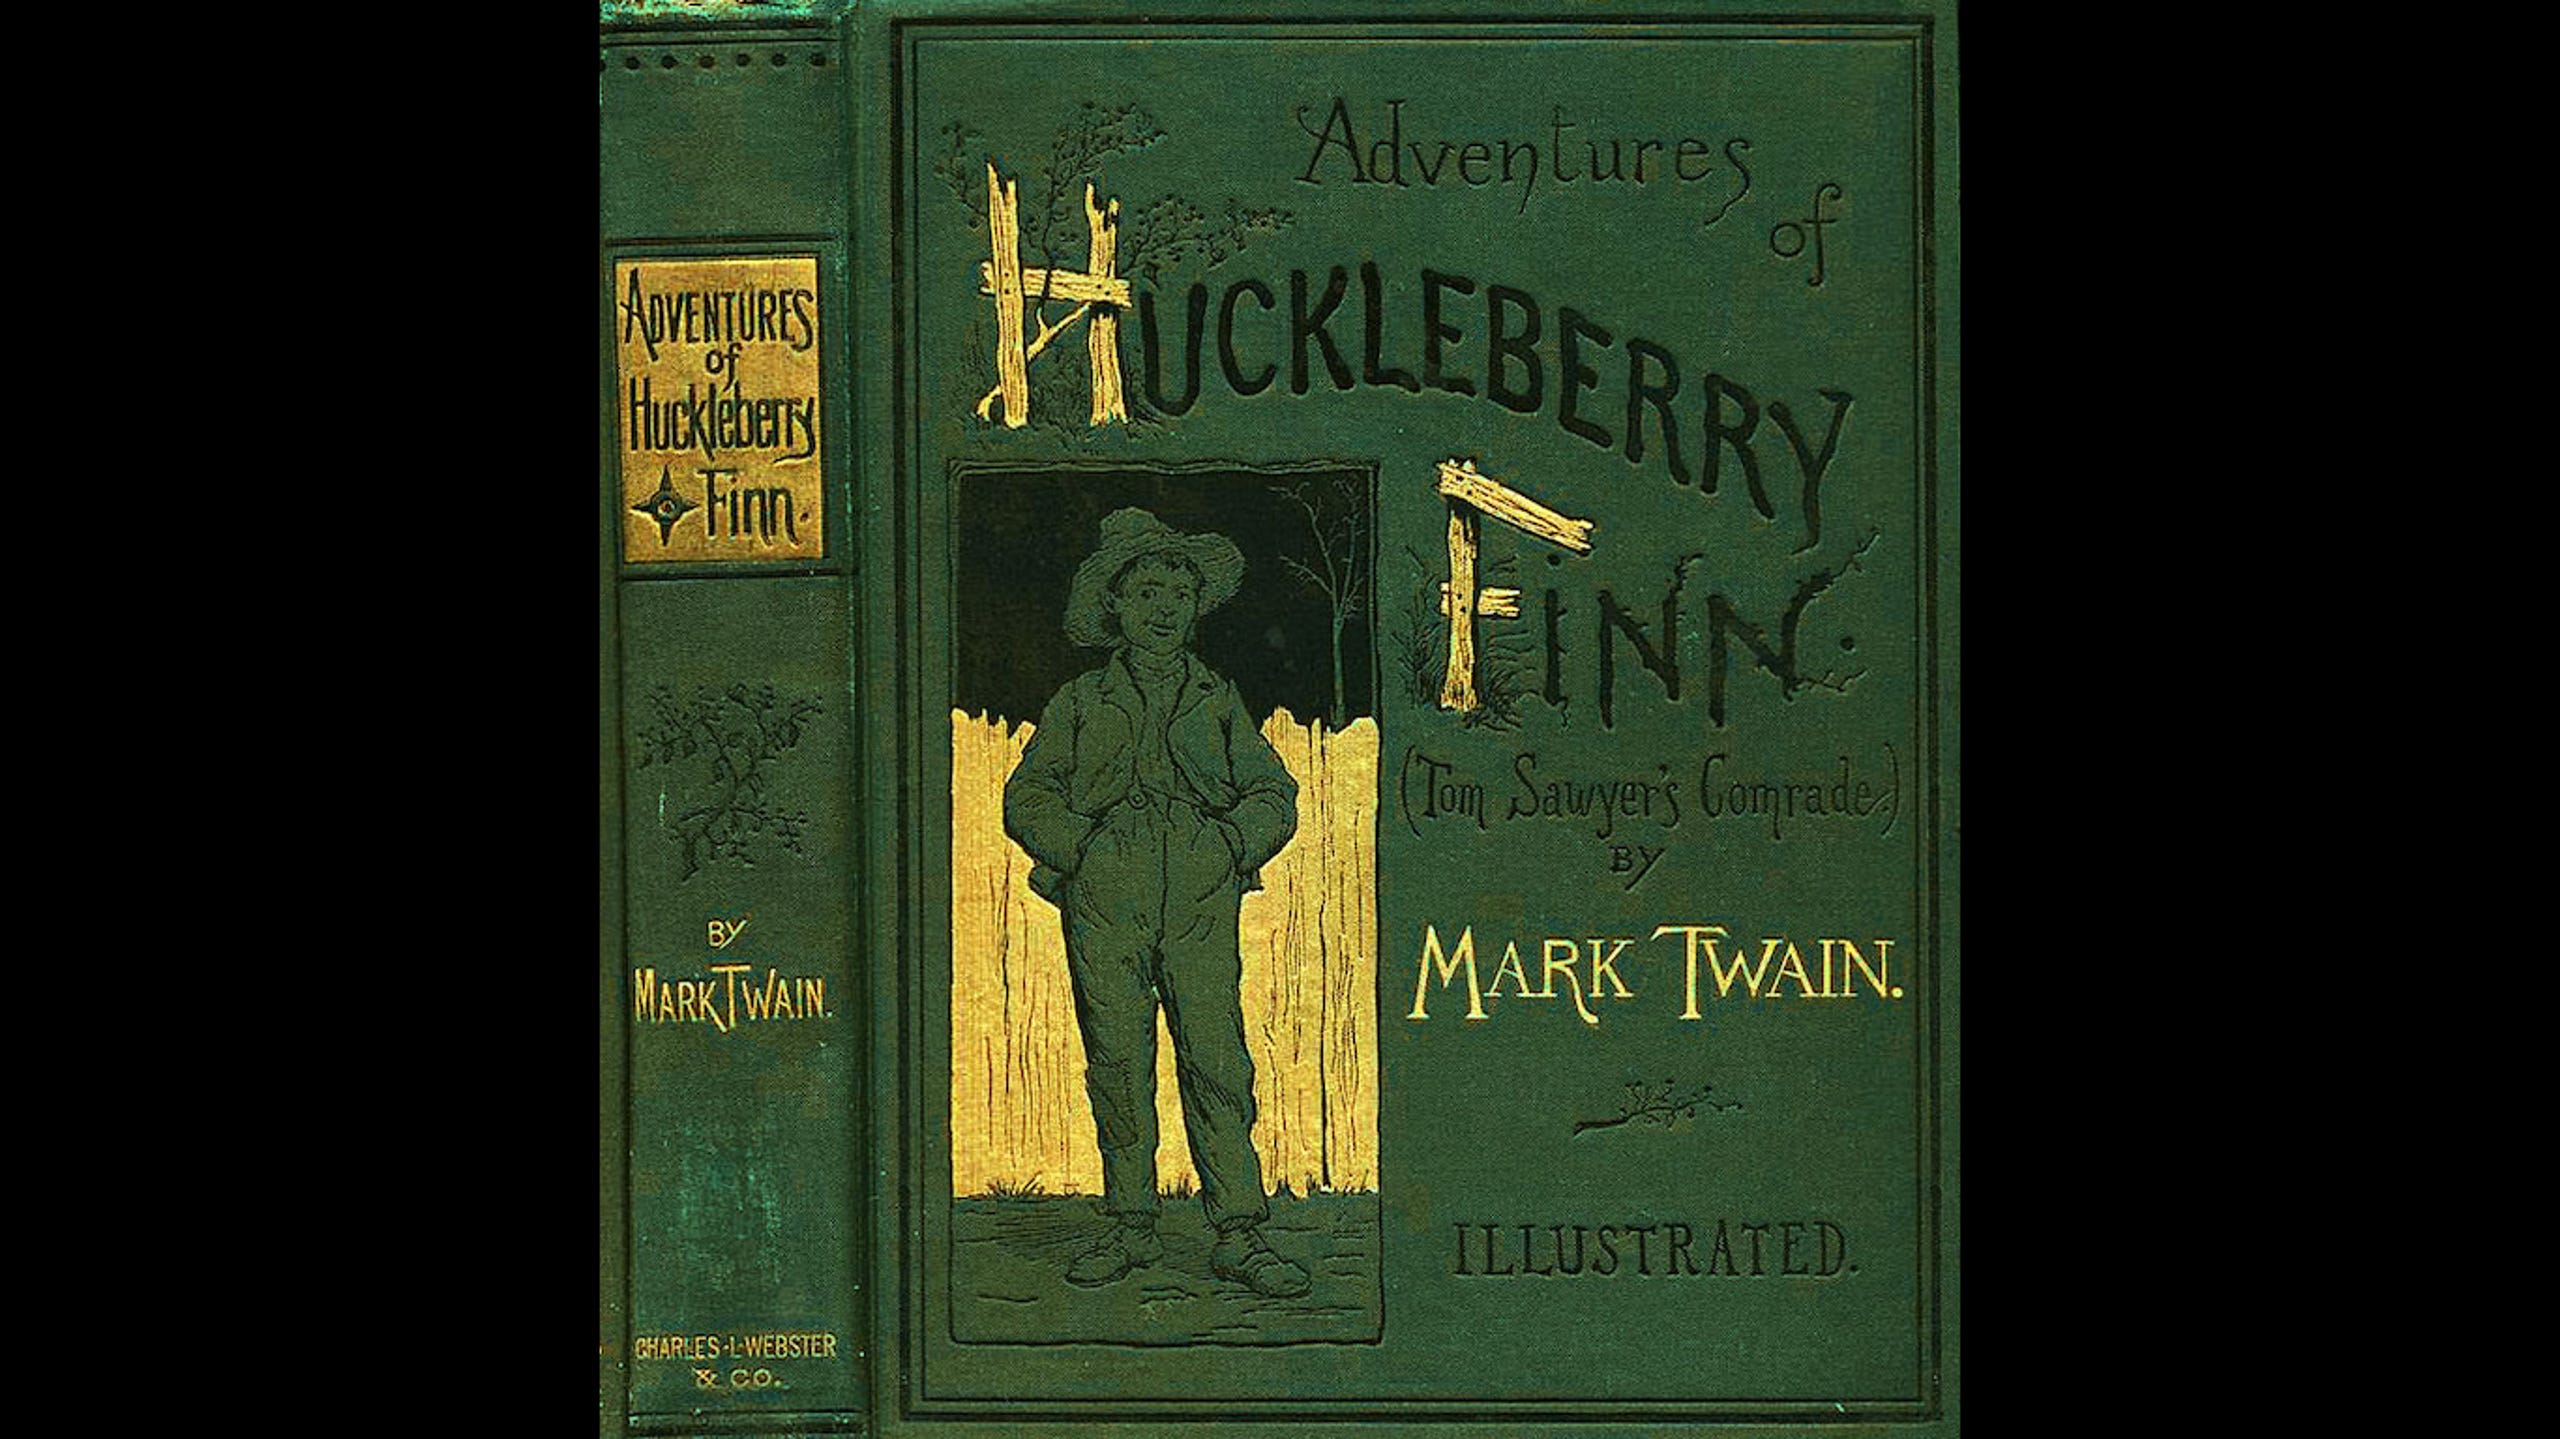 <strong>4. Adventures of Huckleberry Finn </strong><strong>• Author:</strong> Mark Twain <strong>• Originally published in:</strong> 1884 <strong>• </strong>The story of the youngster who runs away from home and his adventures with his friend, a runaway slave, has captivated America for more than a century. Readers go on a journey with the characters, compelled by brilliant storytelling. "There are those who say this book should be edited to take out offensive language or taken off reading lists when in fact it is meant to outrage the reader about the reality of slavery in this country and language that racists still use as a means of trying to control not just a narrative but race and history," Uruburu said.